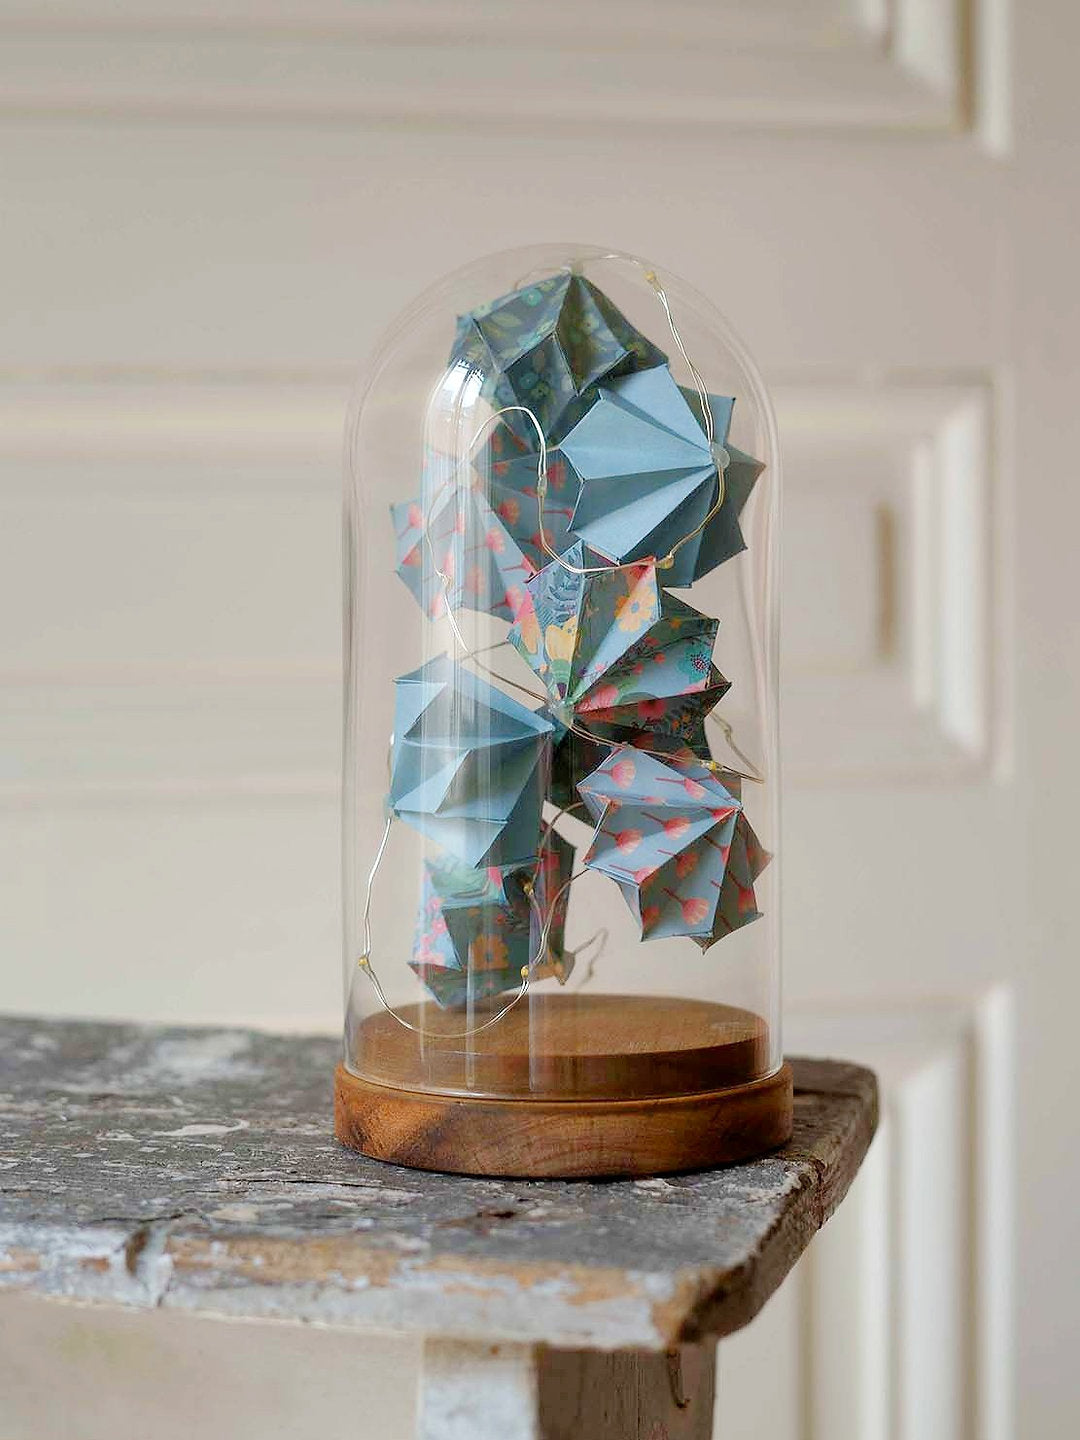 Large glass bell - Light garland of origami diamonds - Peacock